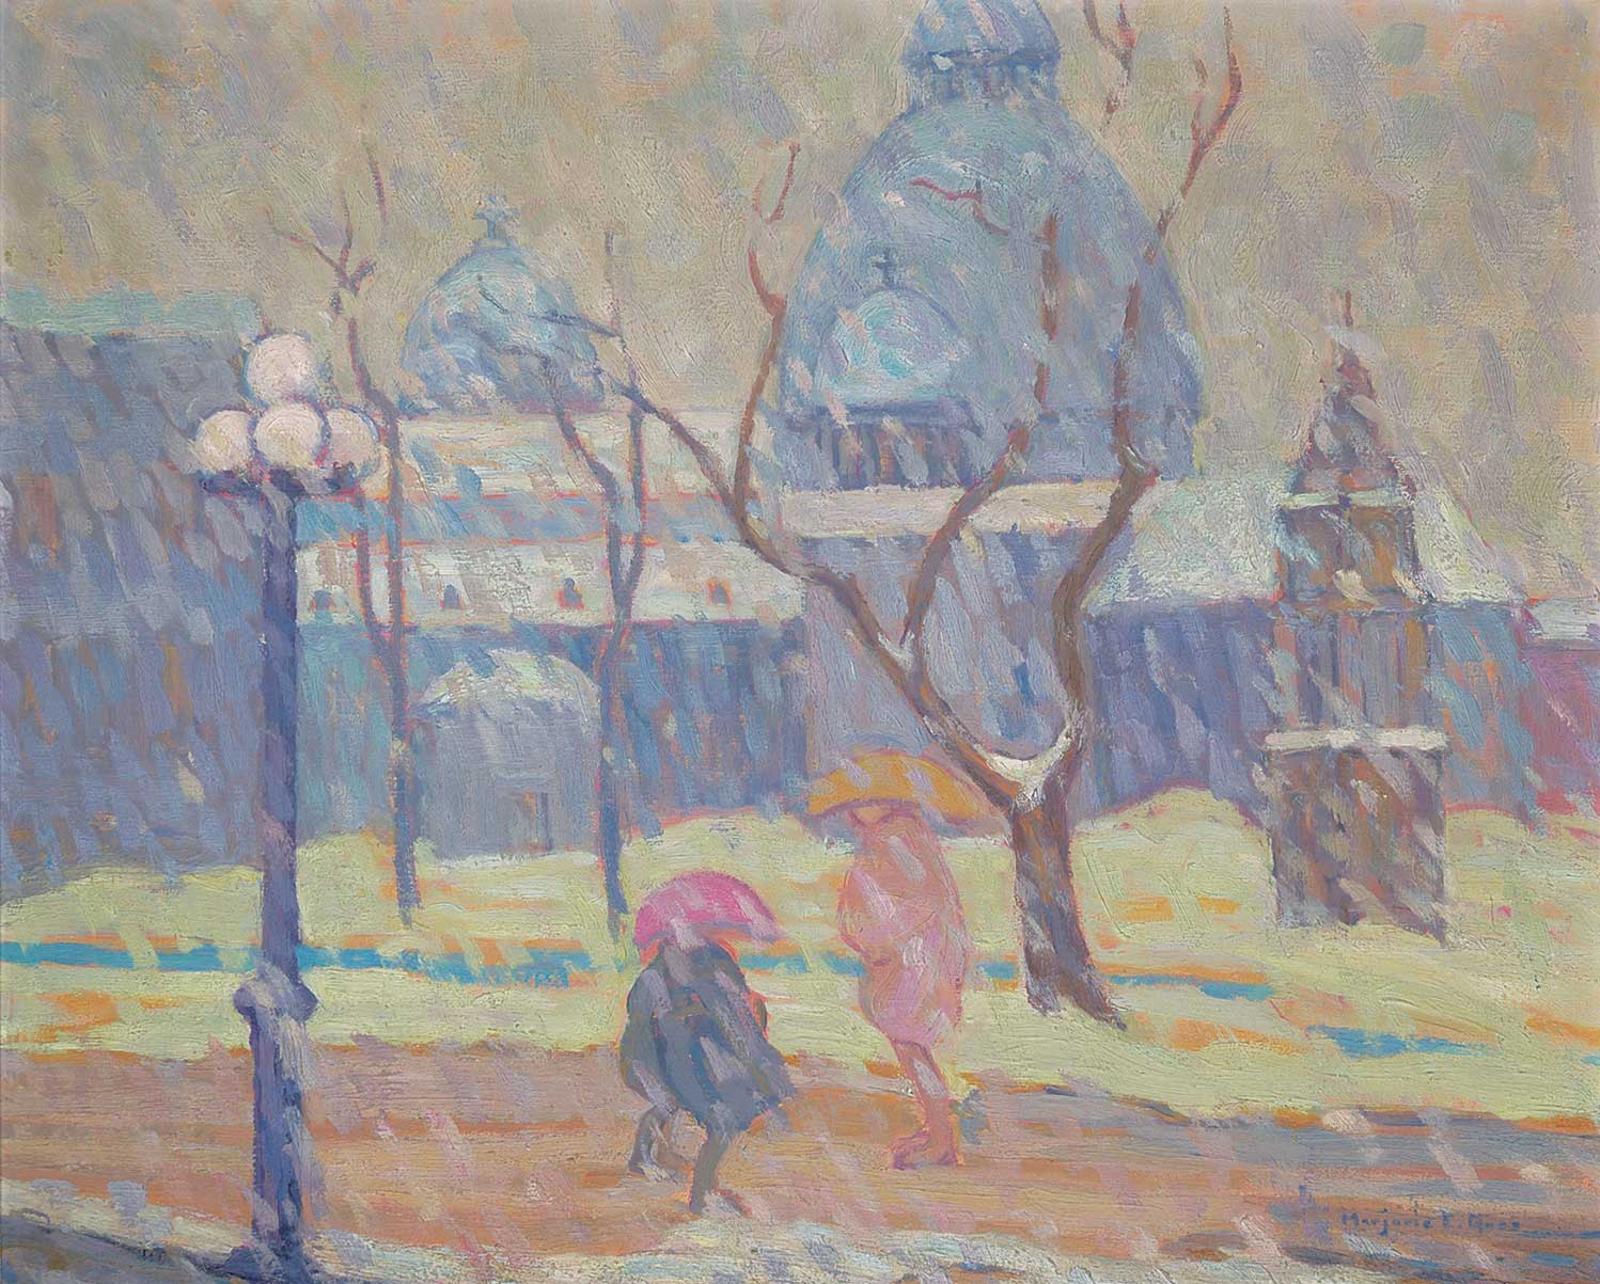 Marjorie Earle Gass (1889-1928) - Dominion Square on a Wintery Day